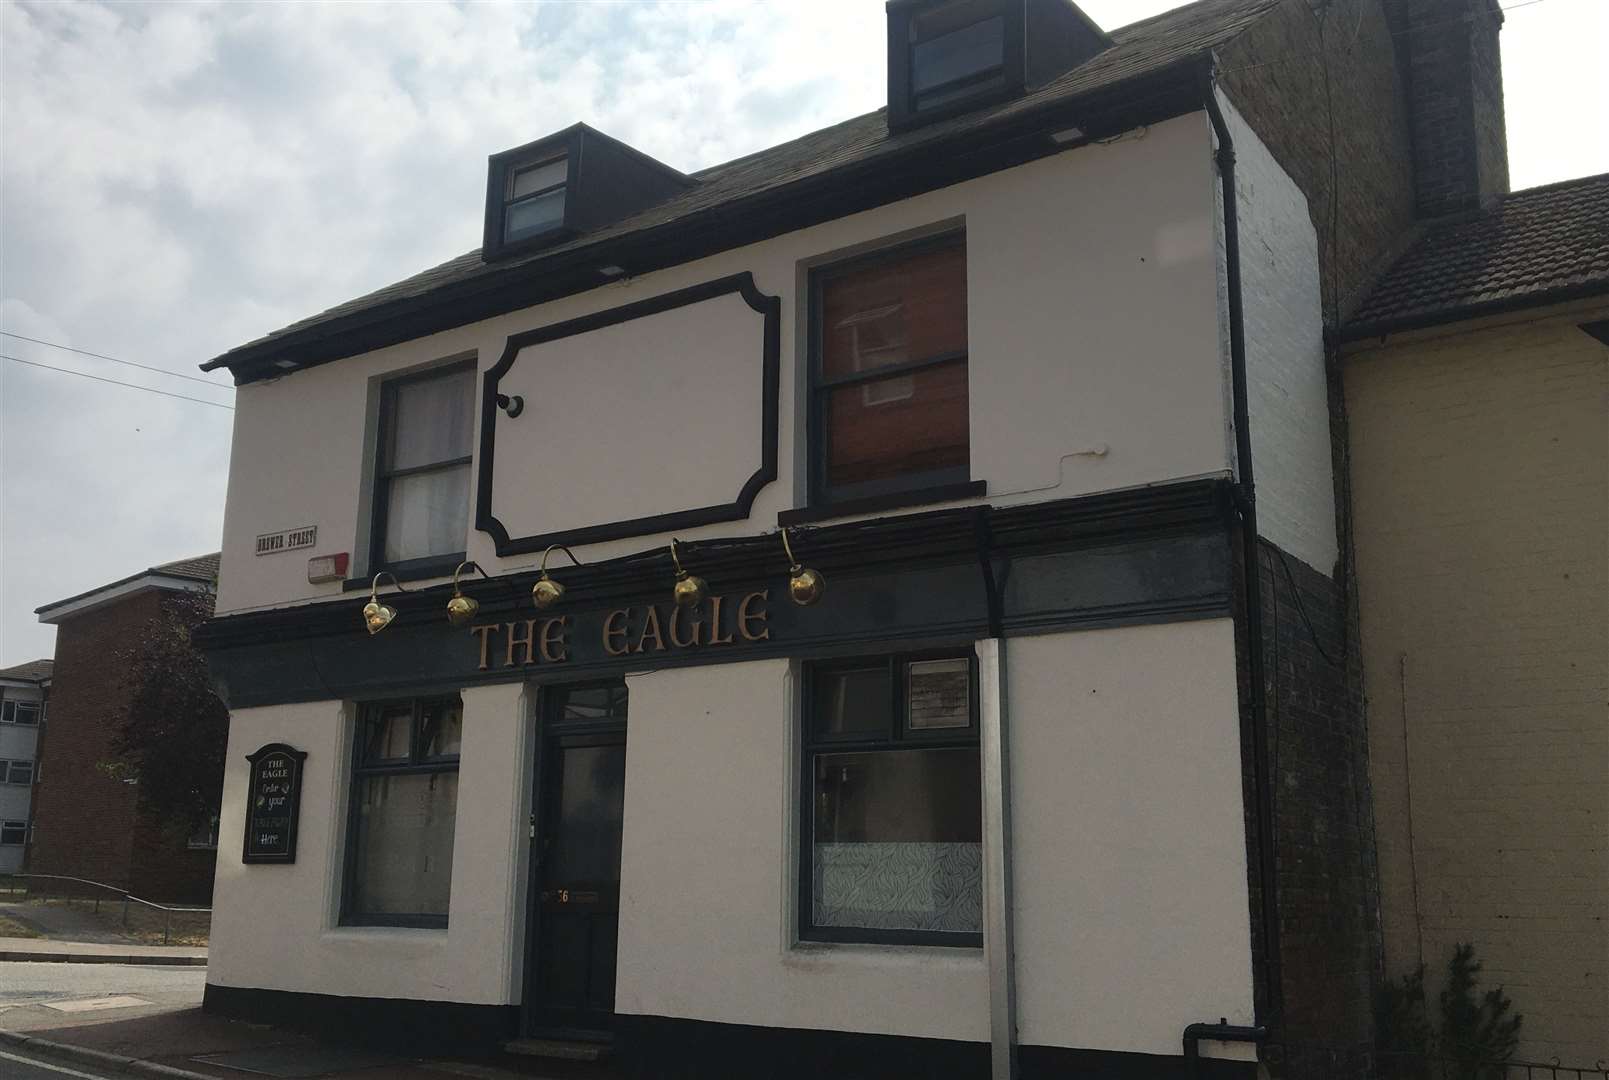 The Eagle pub has had a revamp inside and out